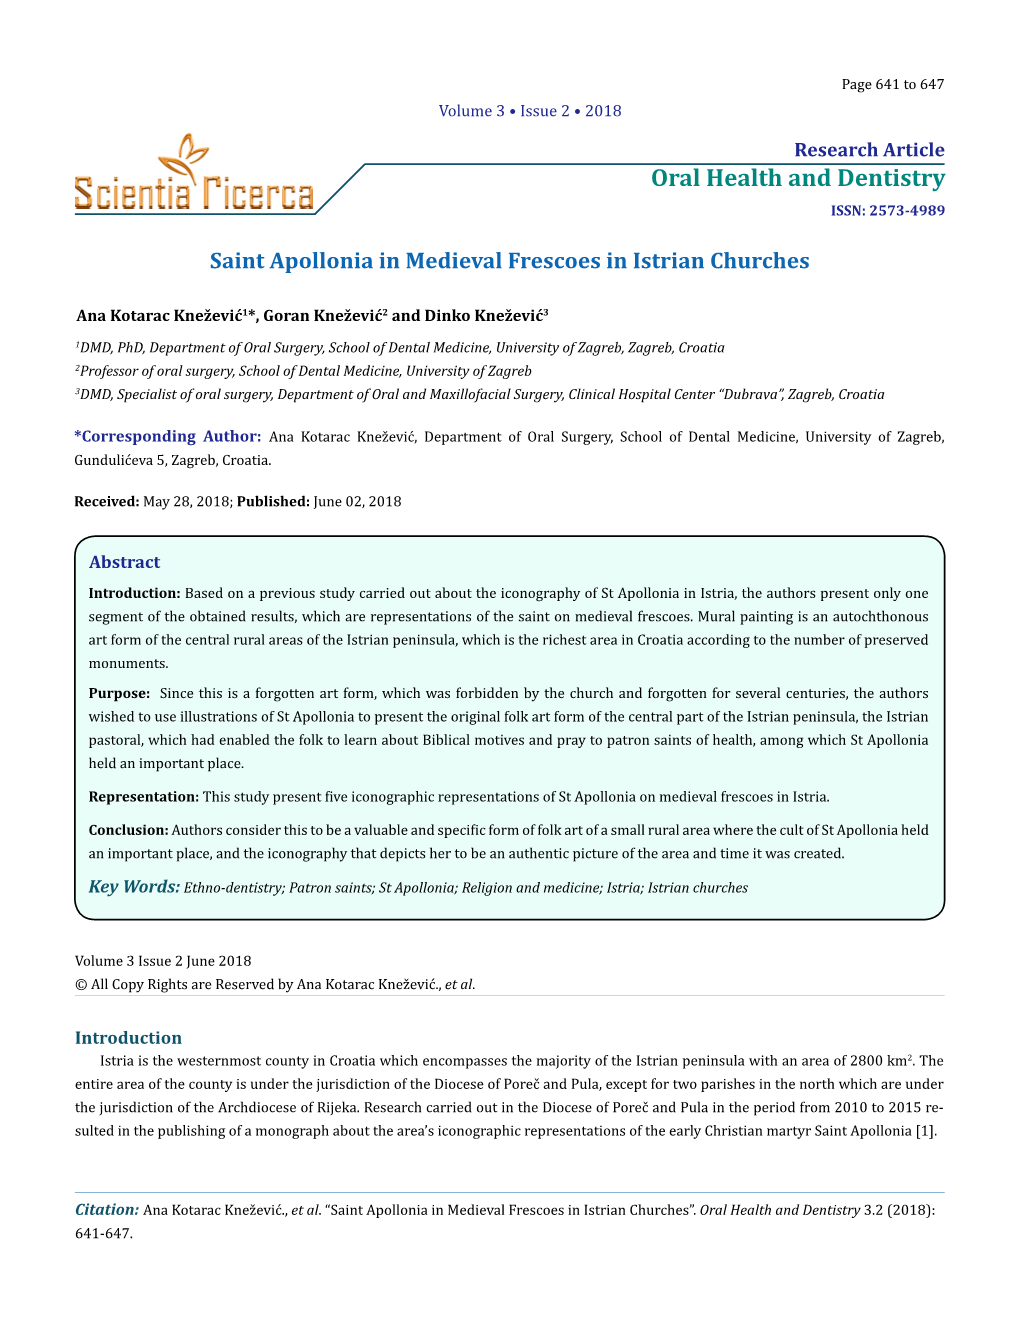 Oral Health and Dentistry ISSN: 2573-4989